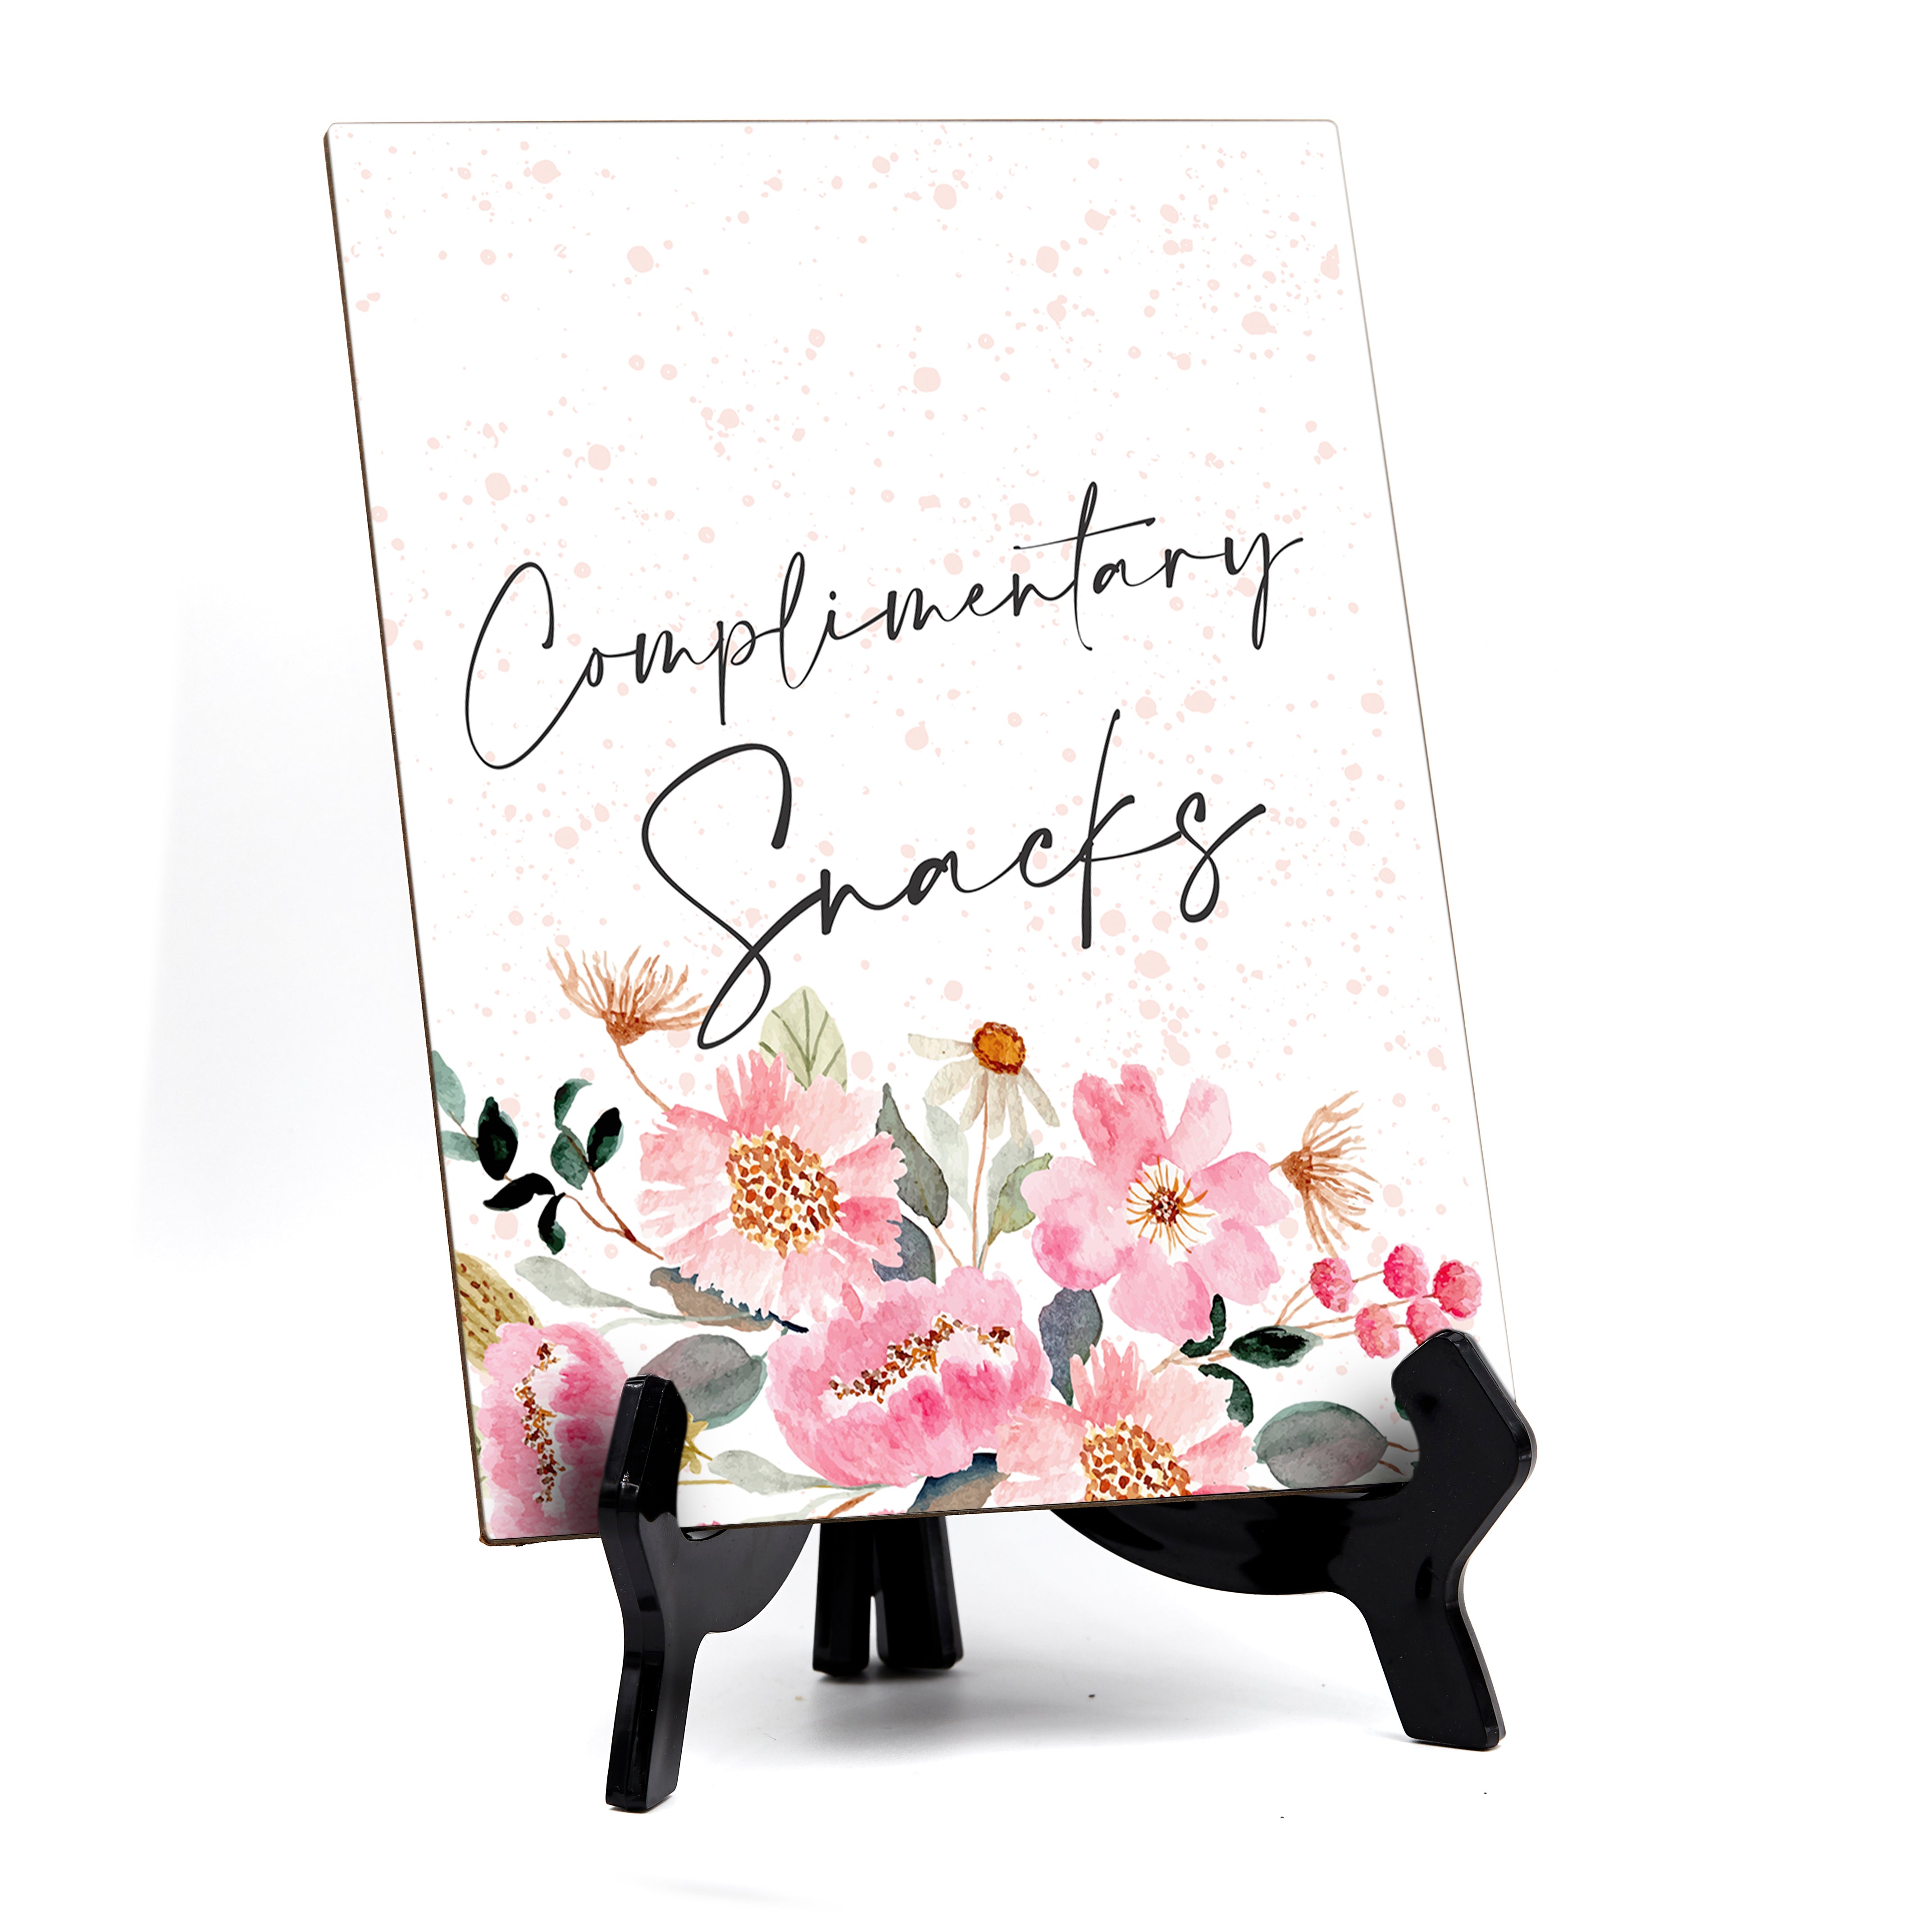 Complimentary Snacks Table Sign with Easel, Floral Watercolor Design (6" x 8")